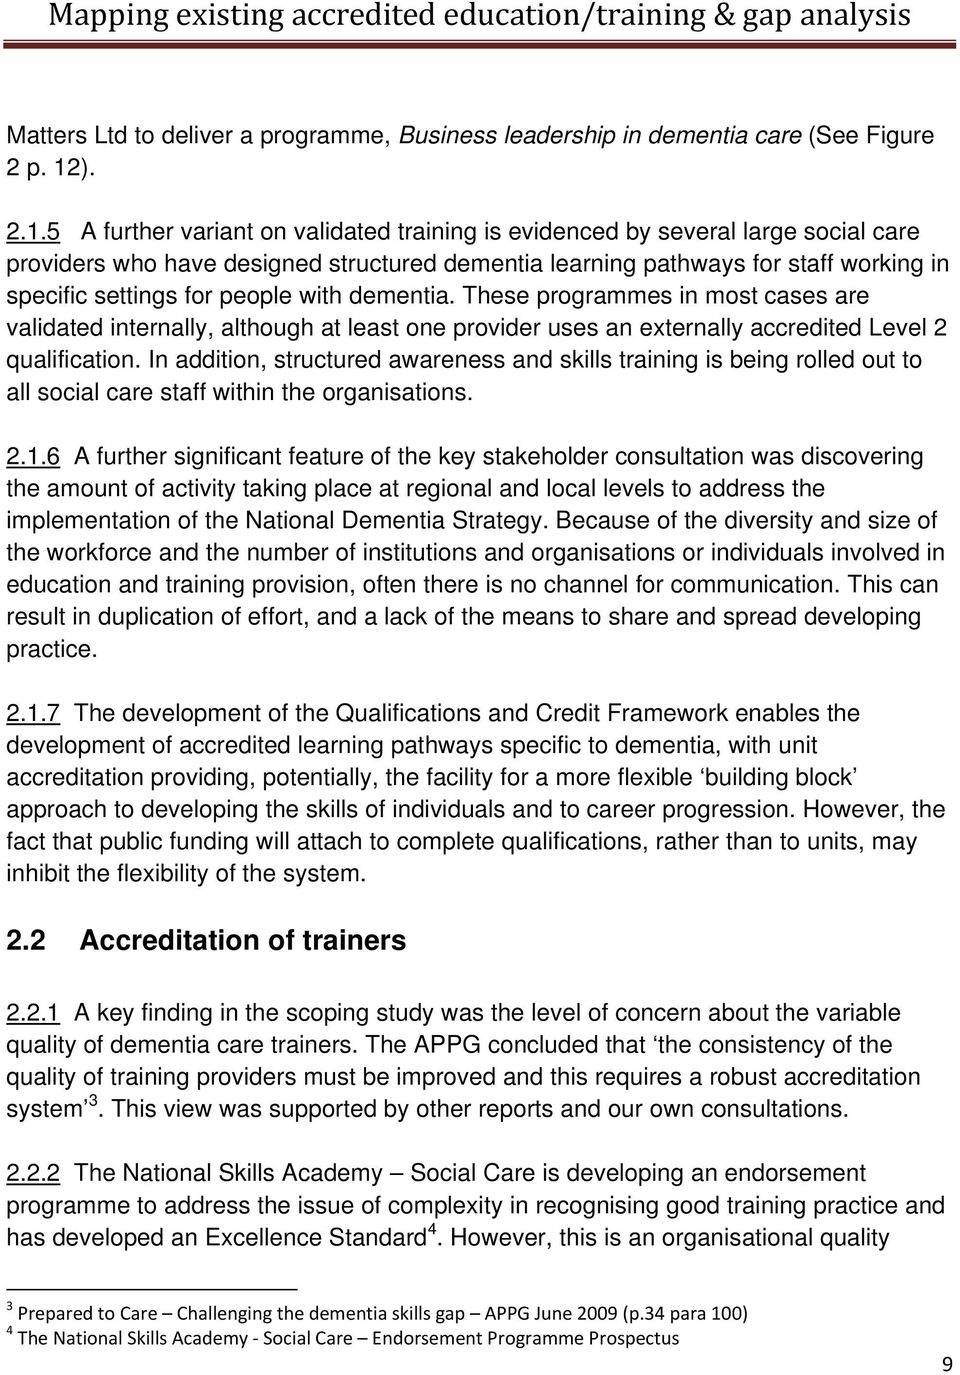 5 A further variant on validated training is evidenced by several large social care providers who have designed structured dementia learning pathways for staff working in specific settings for people